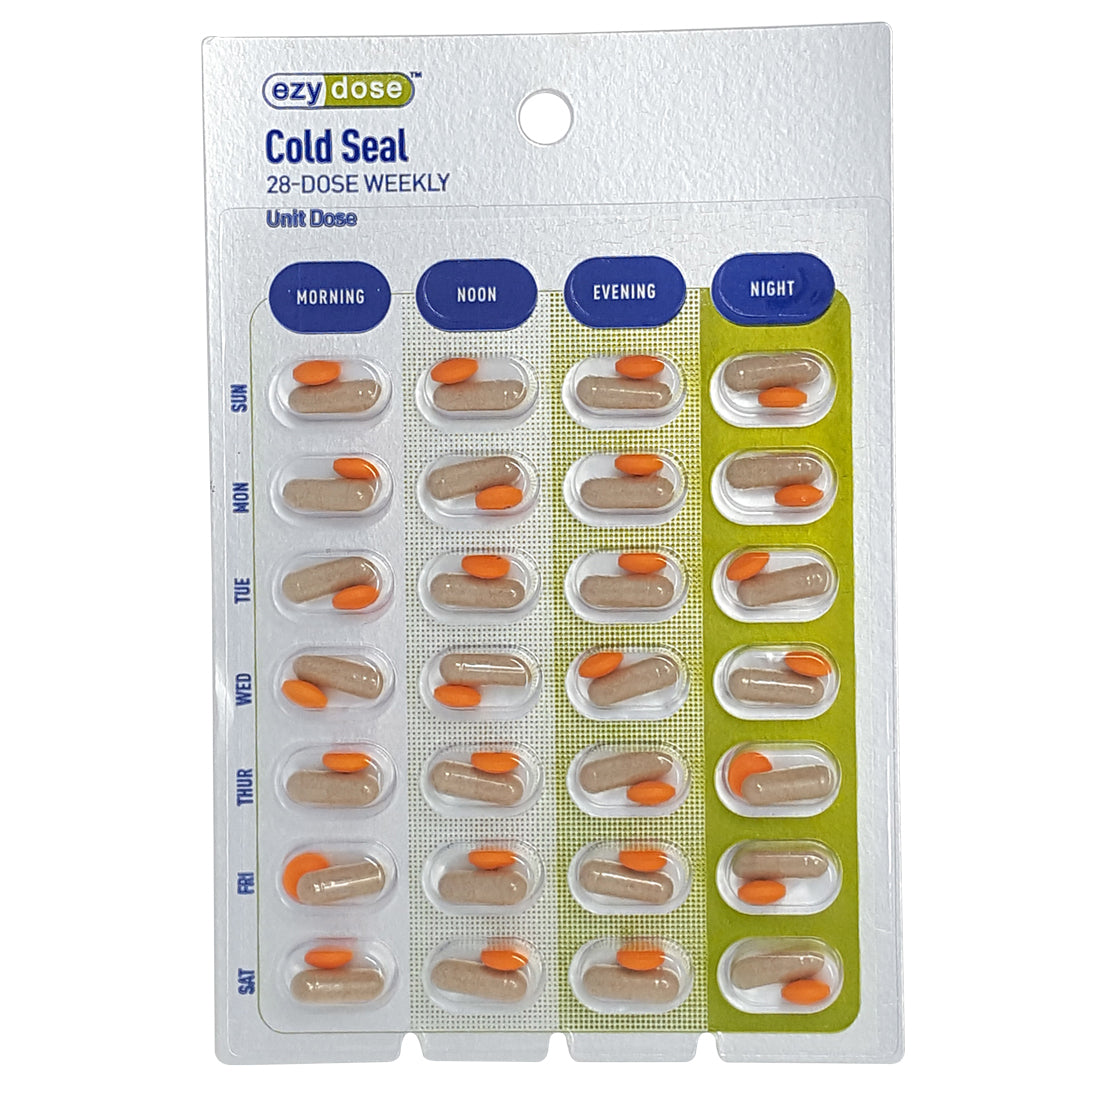 Monthly & Weekly pharmacy pill blister cards. Great for schools, camps, caregivers. Safely adminster correct dosage.